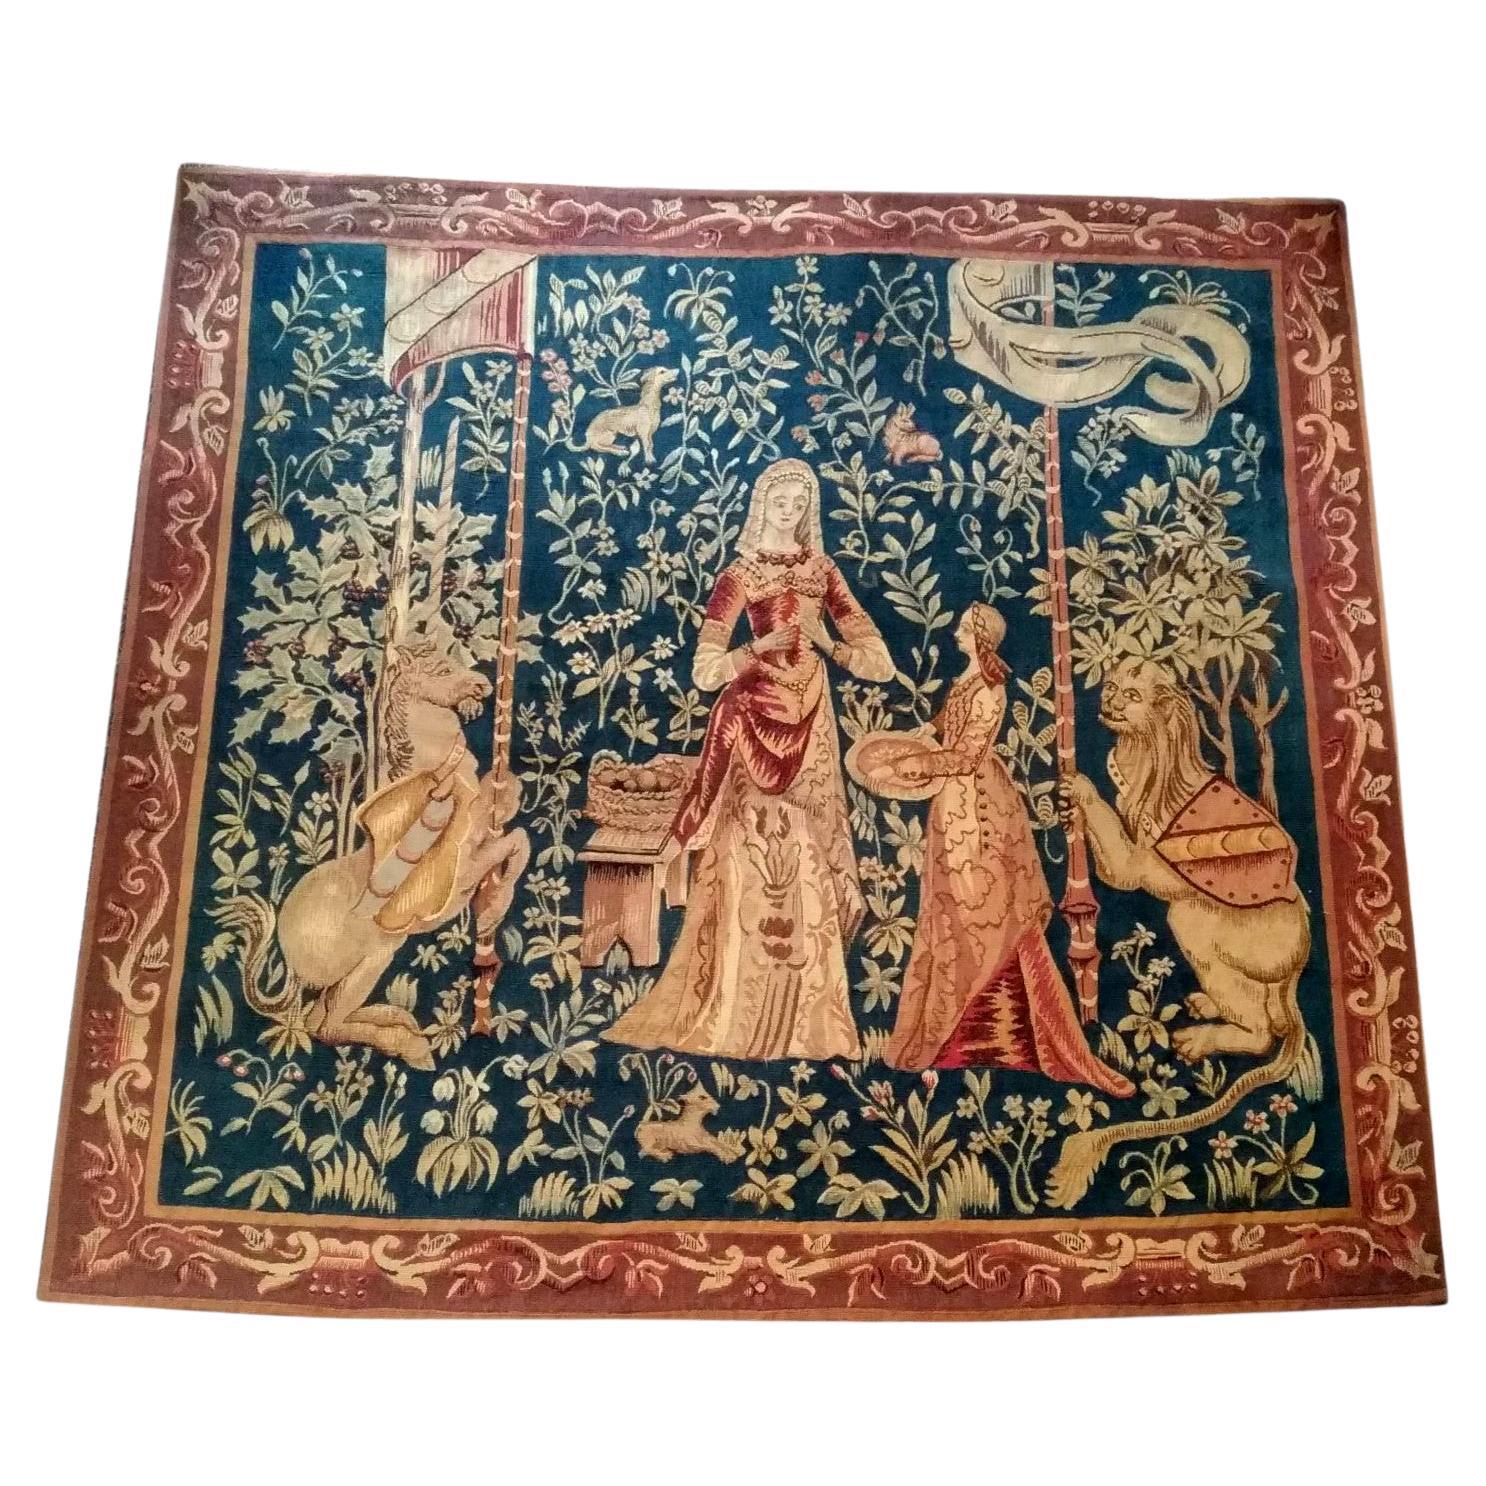  1107 - Aubusson Tapestry 19th Century Lady with the Unicorn  For Sale